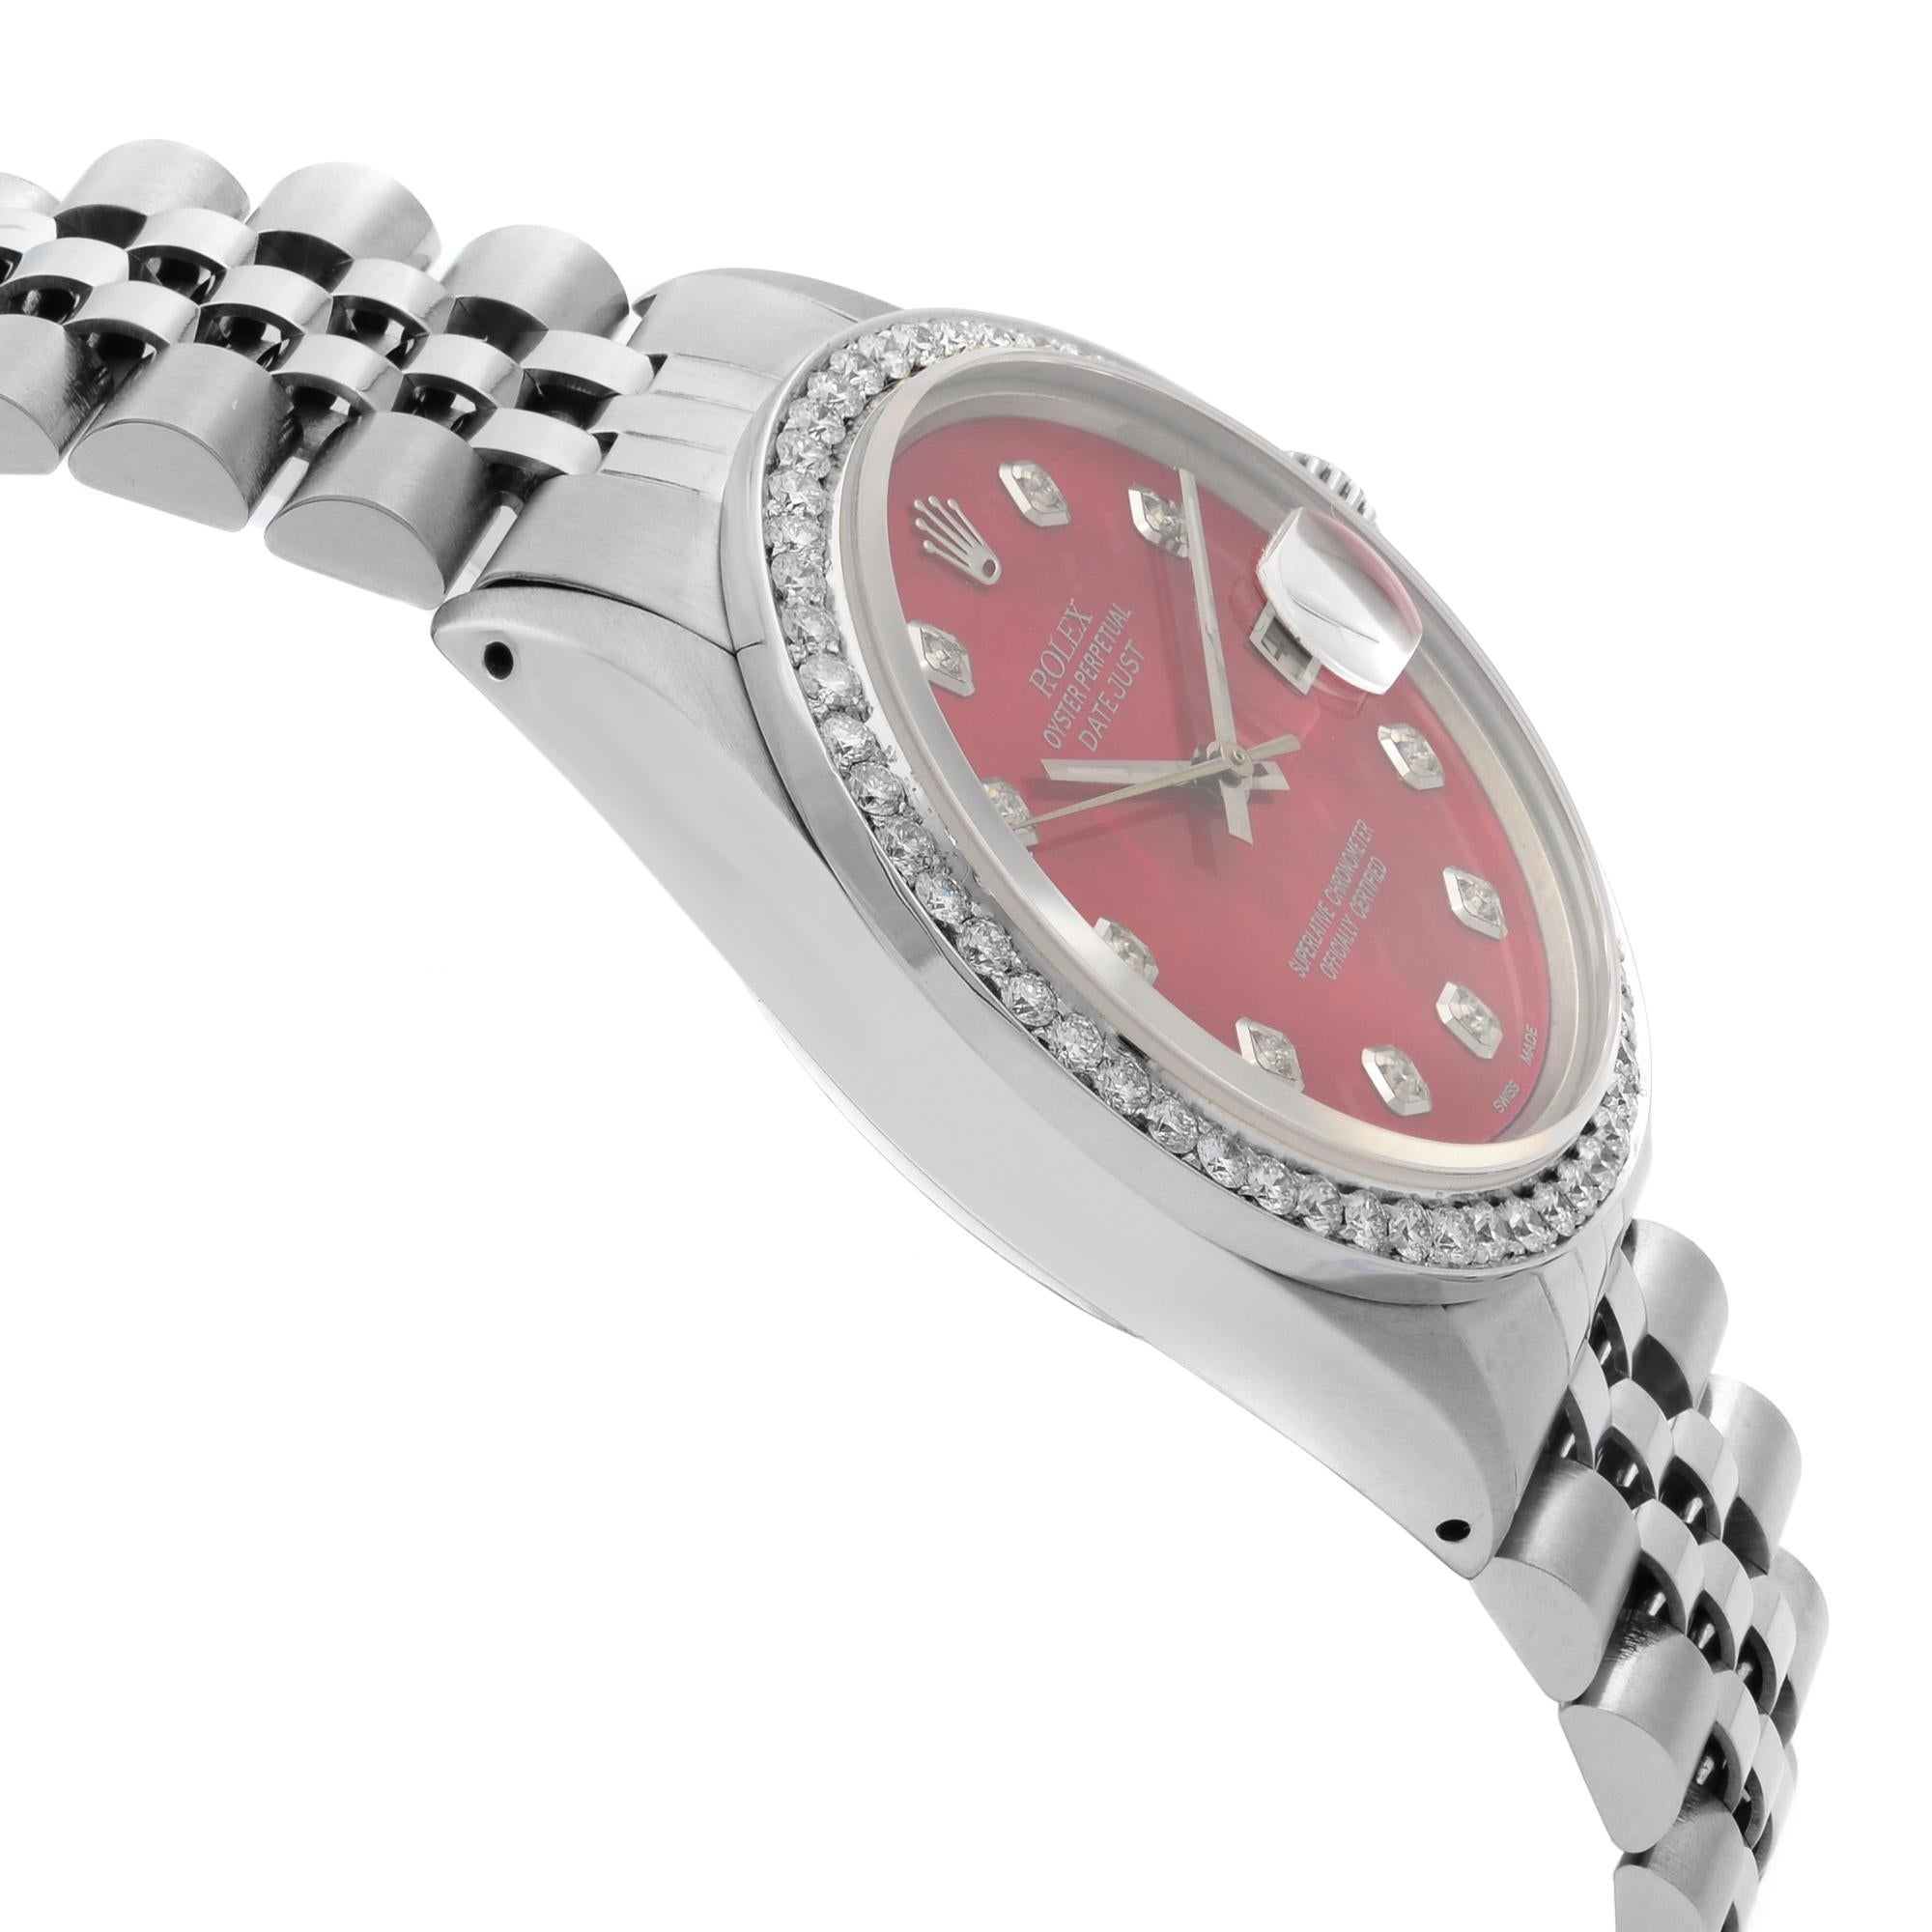 Rolex Datejust Steel Custom Diamond Red MOP Dial Automatic Men’s Watch 16014 In Excellent Condition For Sale In New York, NY